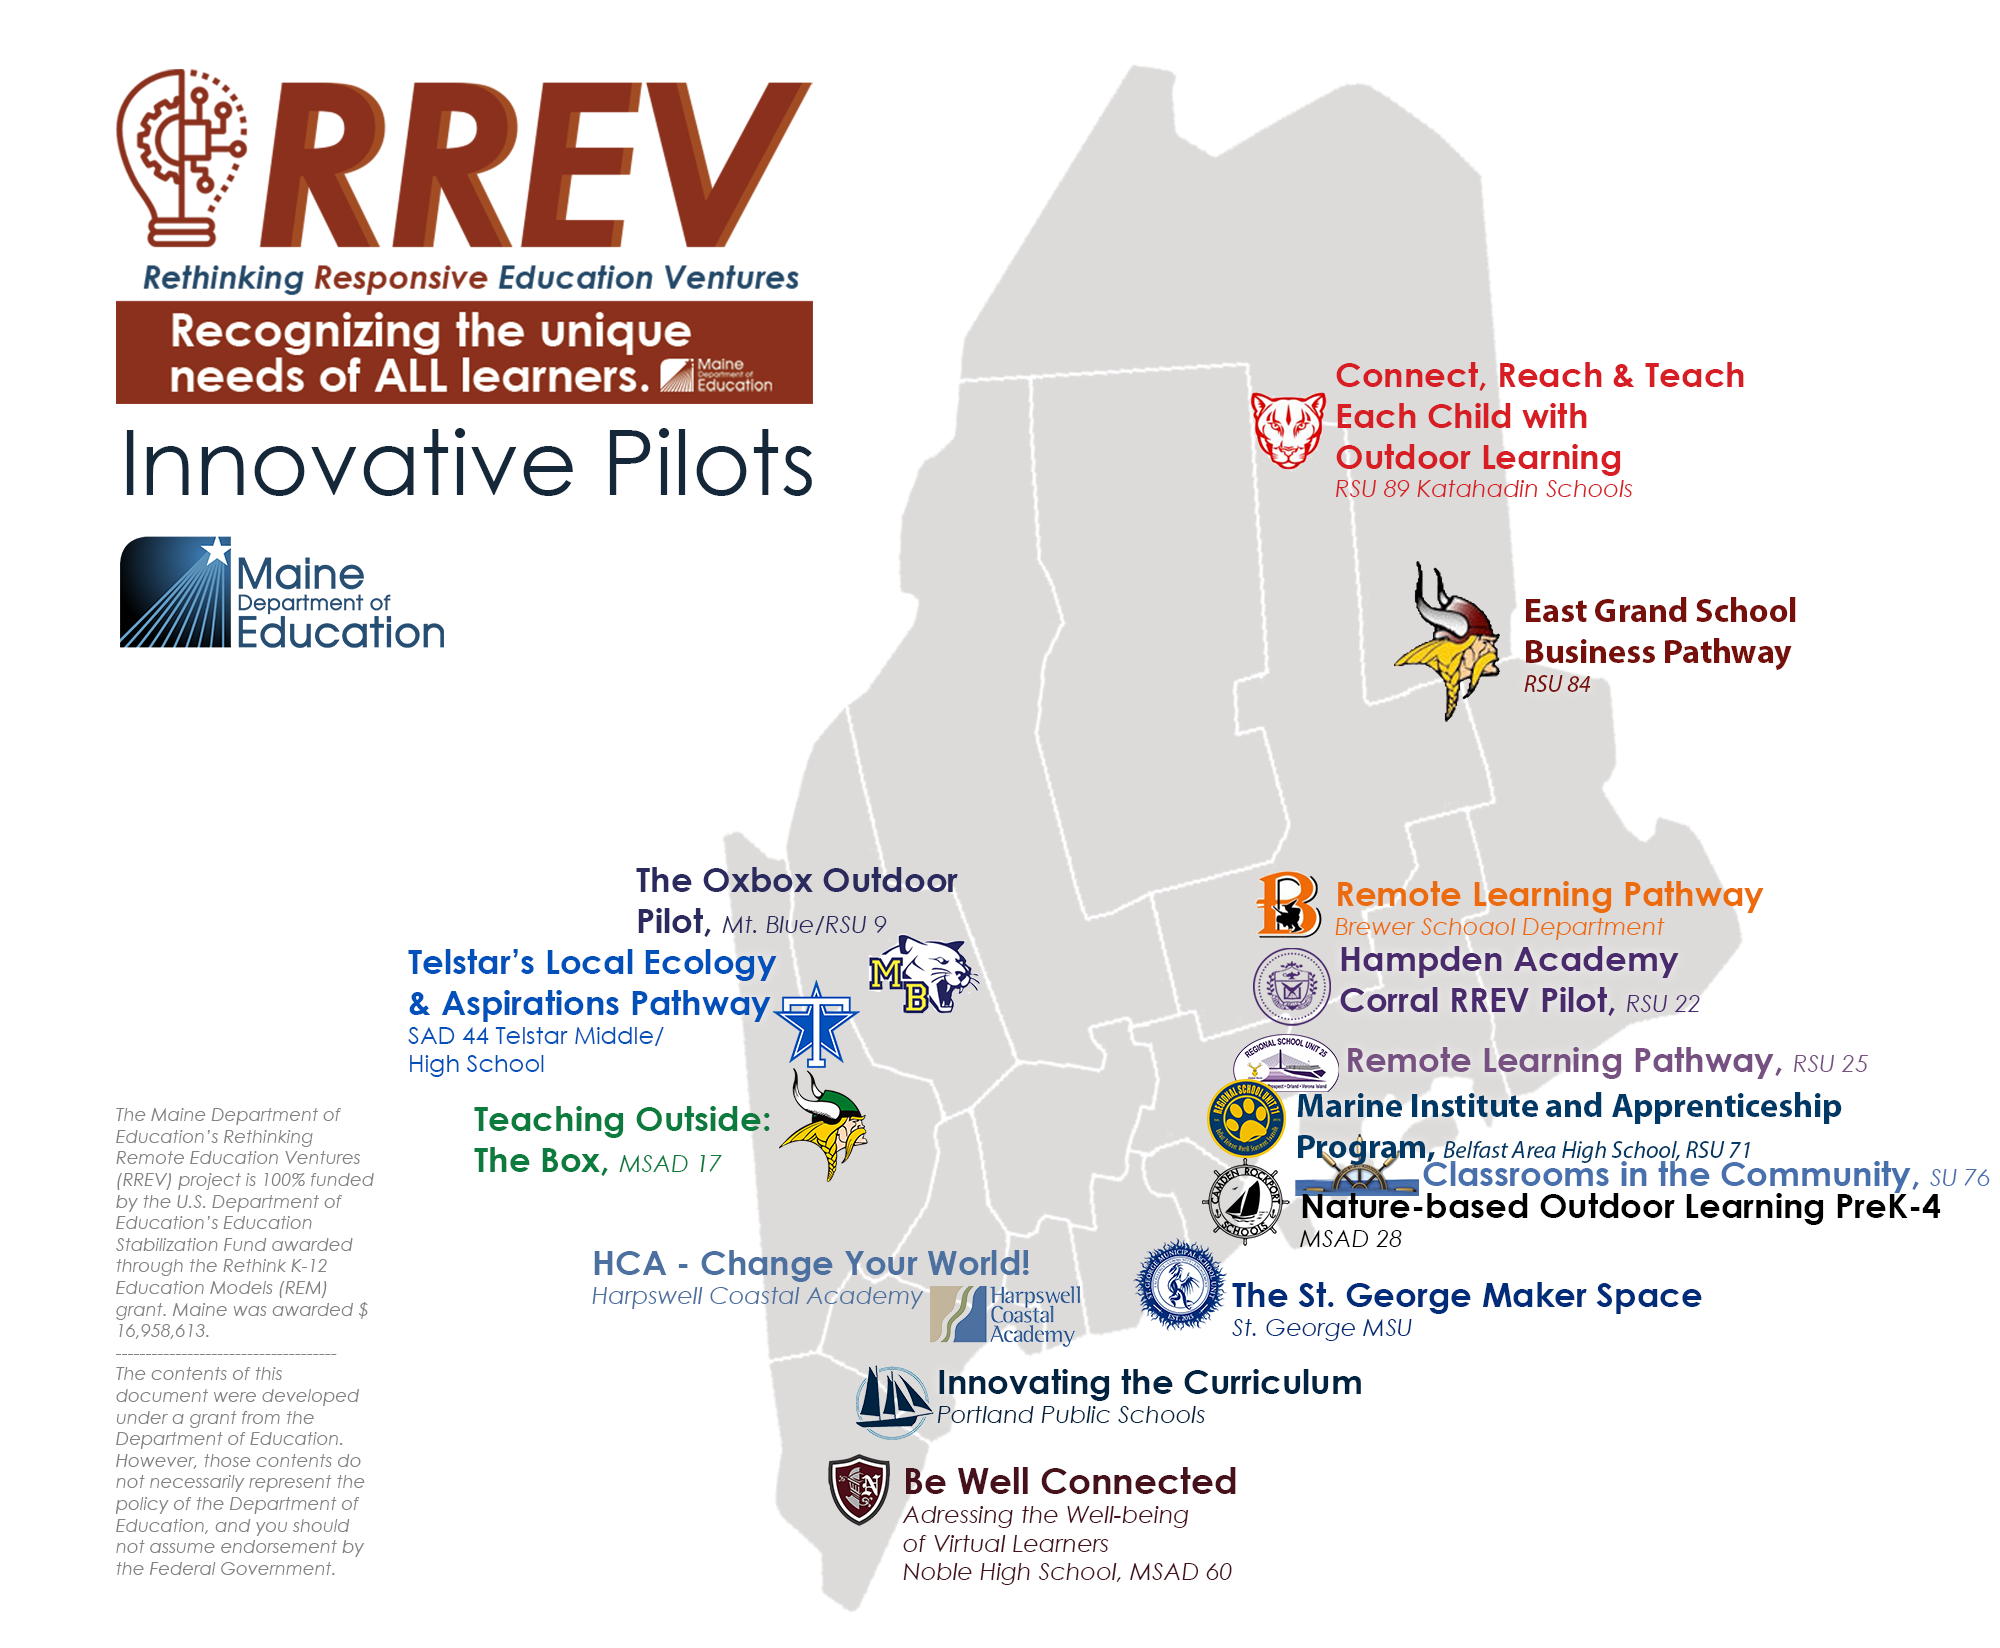 All Districts Receiving RREV Funding Awards